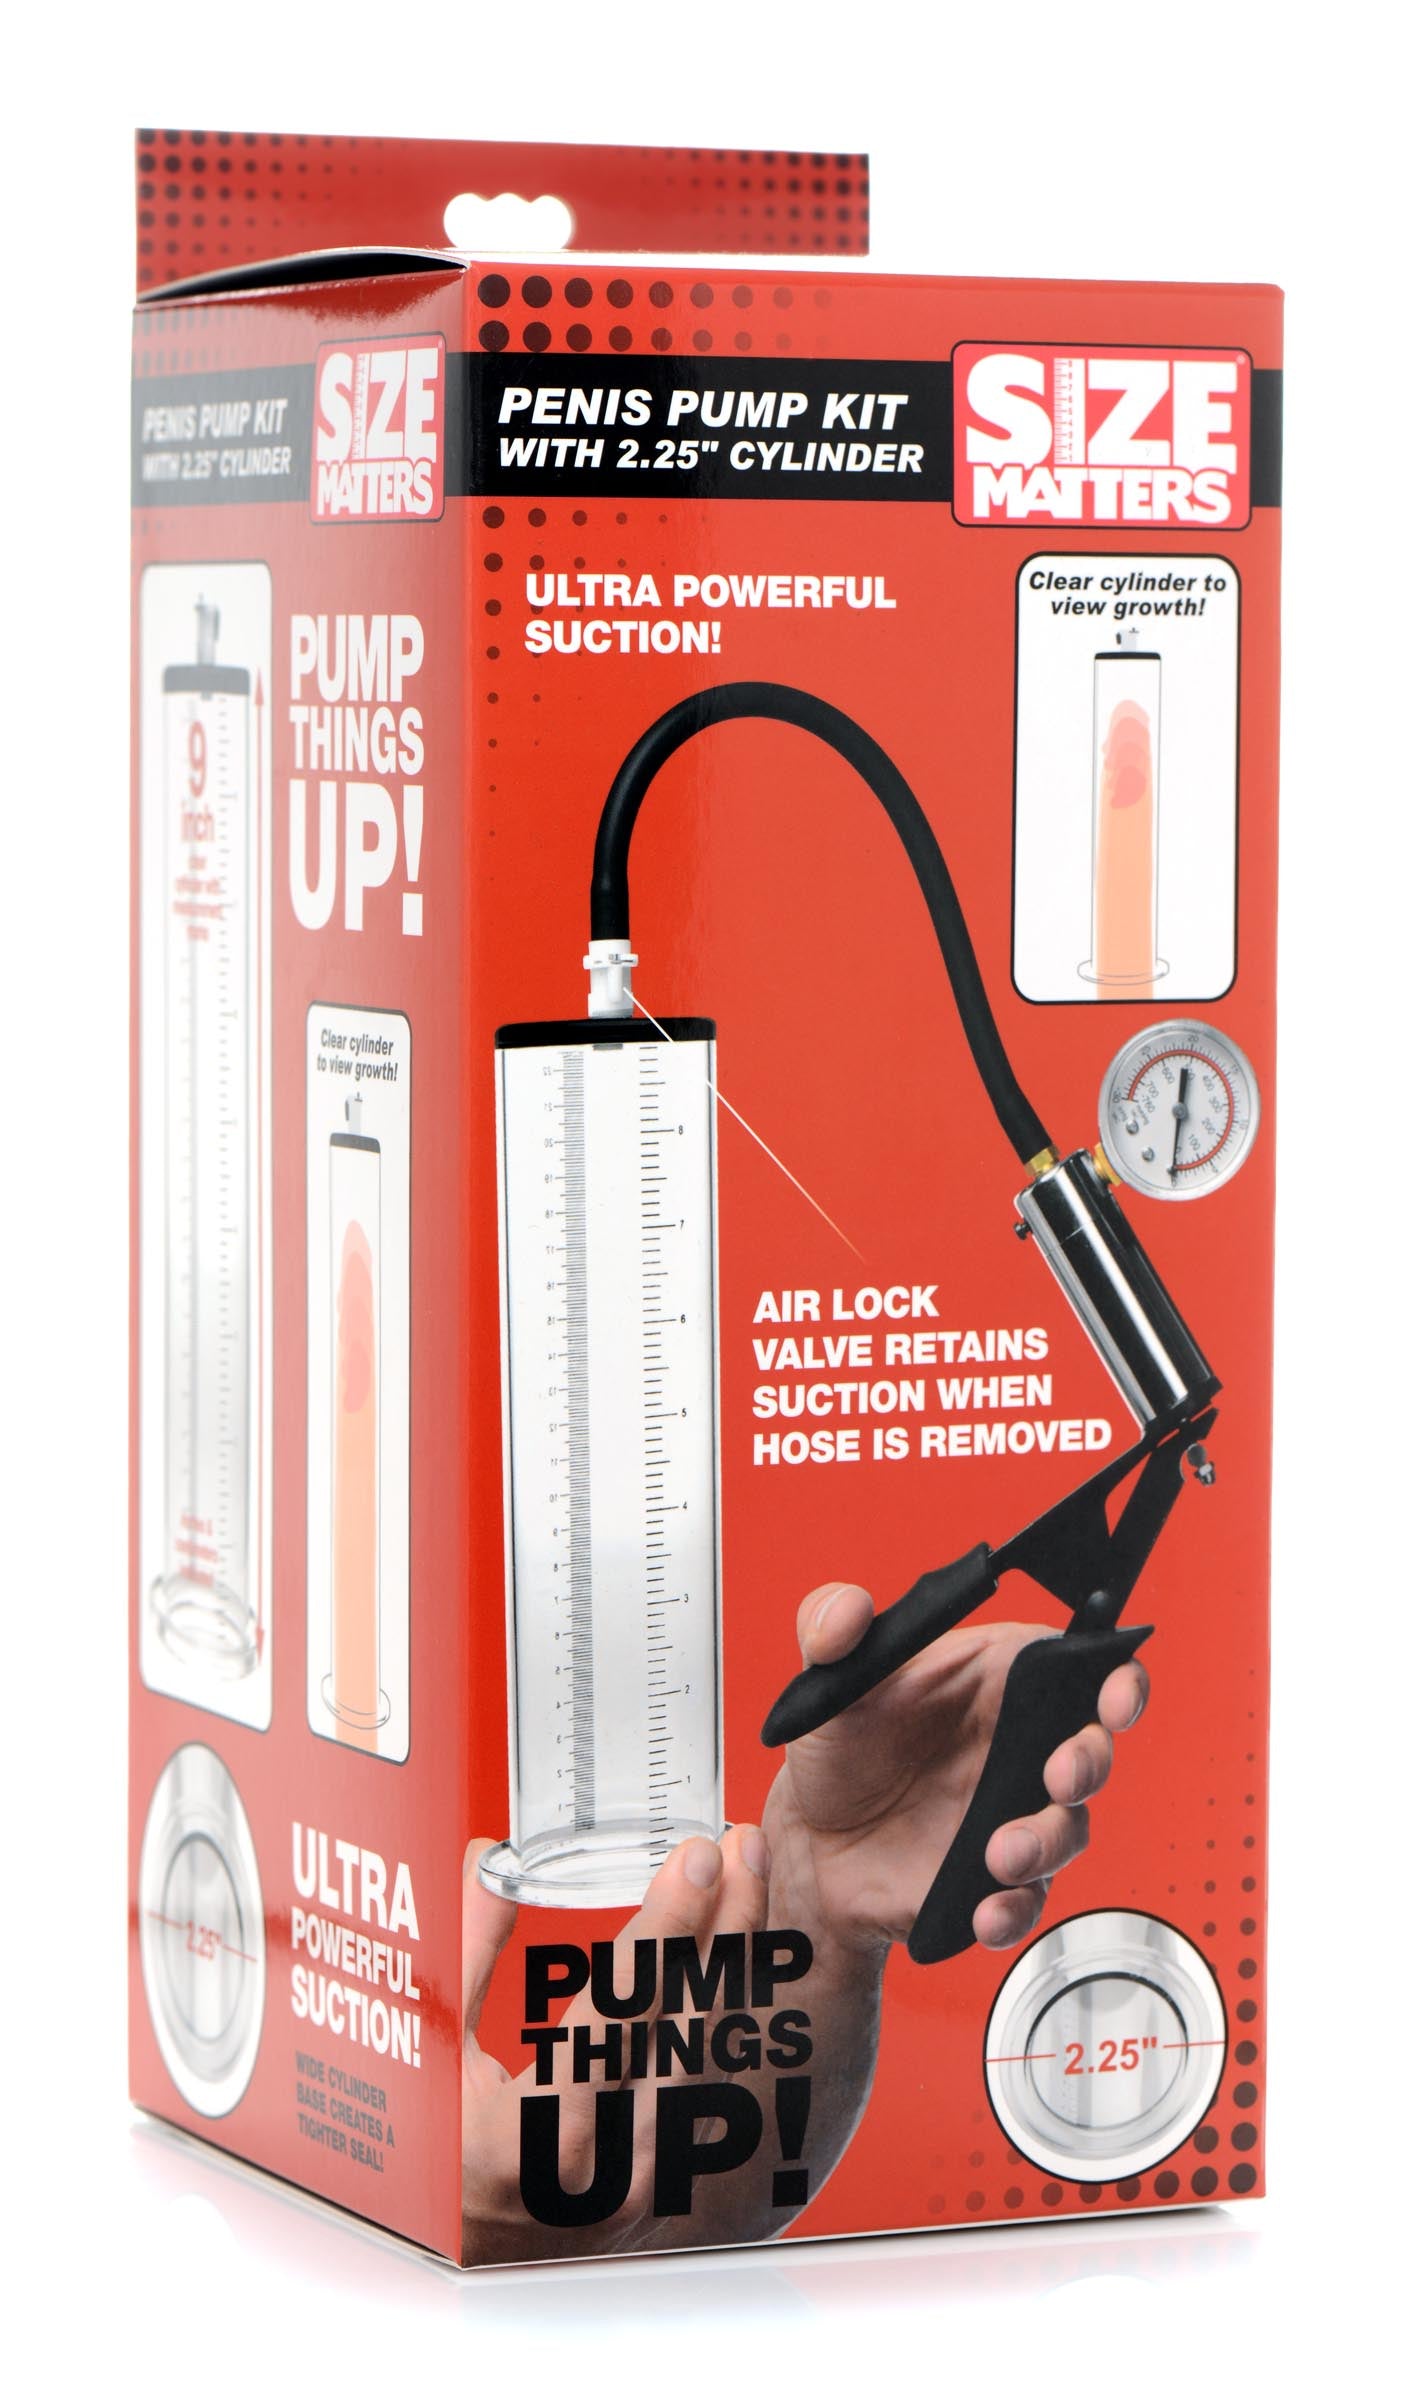 Penis Pump Kit With 2.25 Inch Cylinder